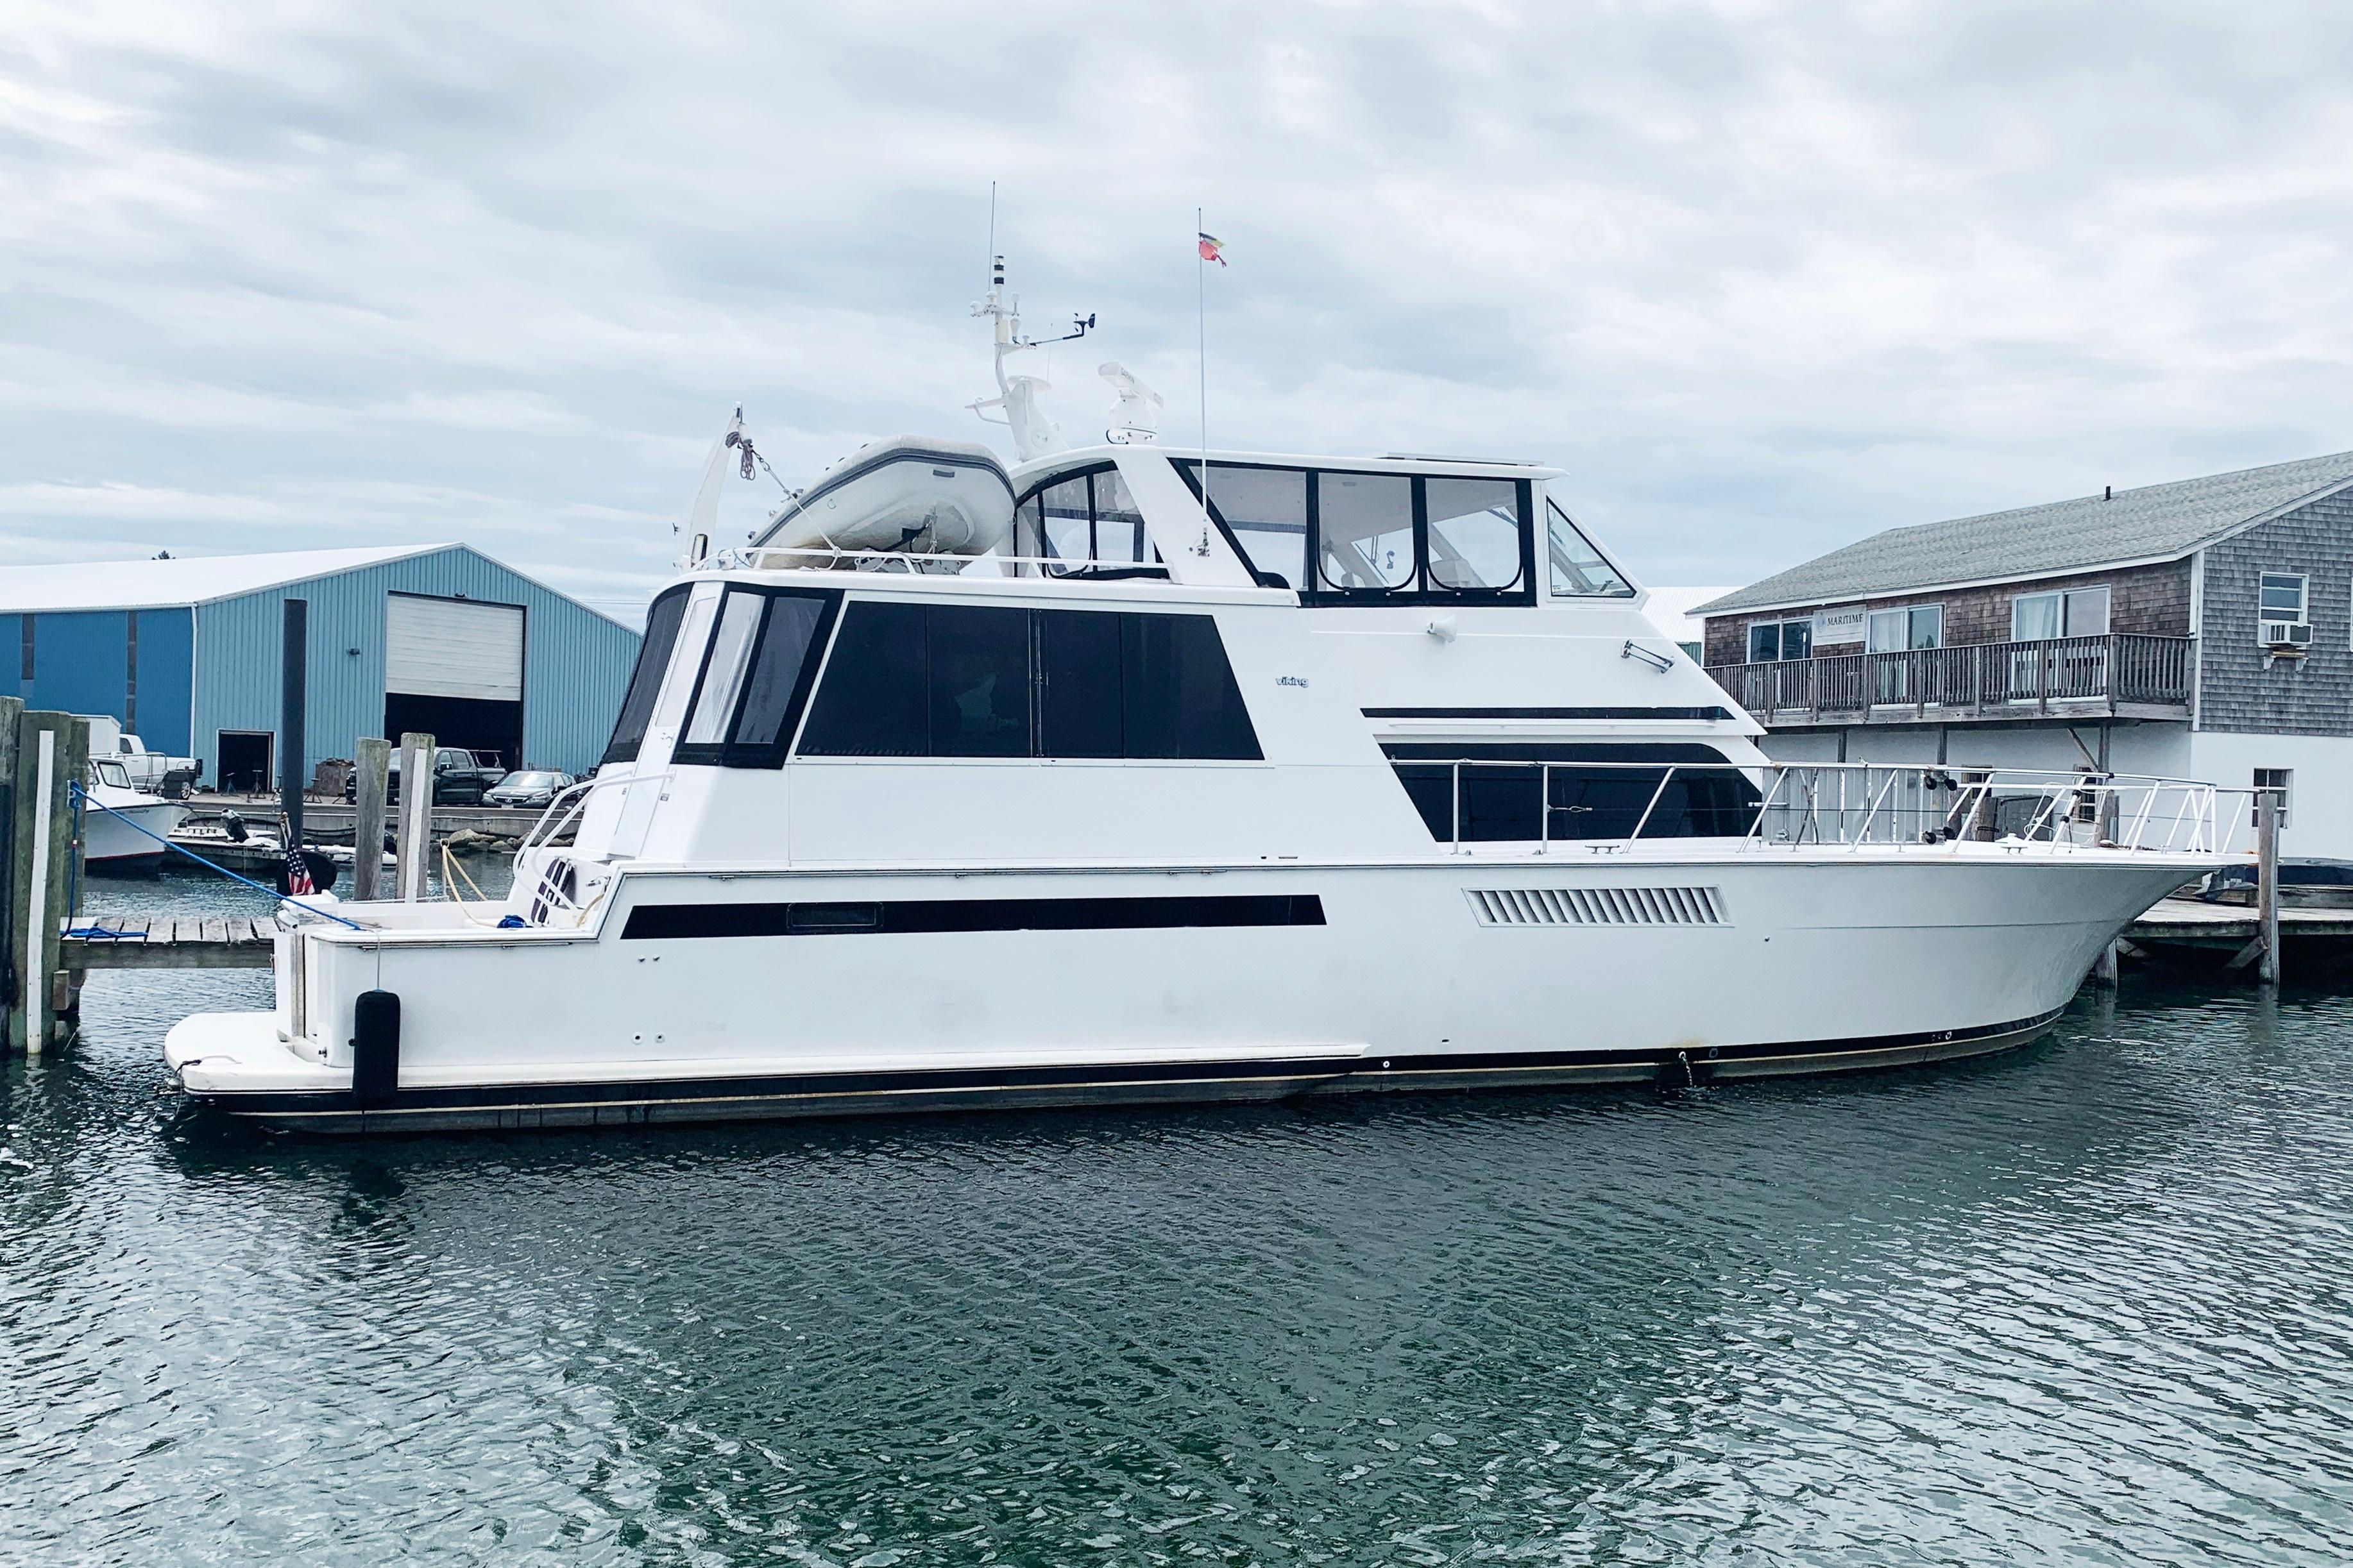 Limitless Yacht for Sale, 60 Viking Yachts Groton, CT